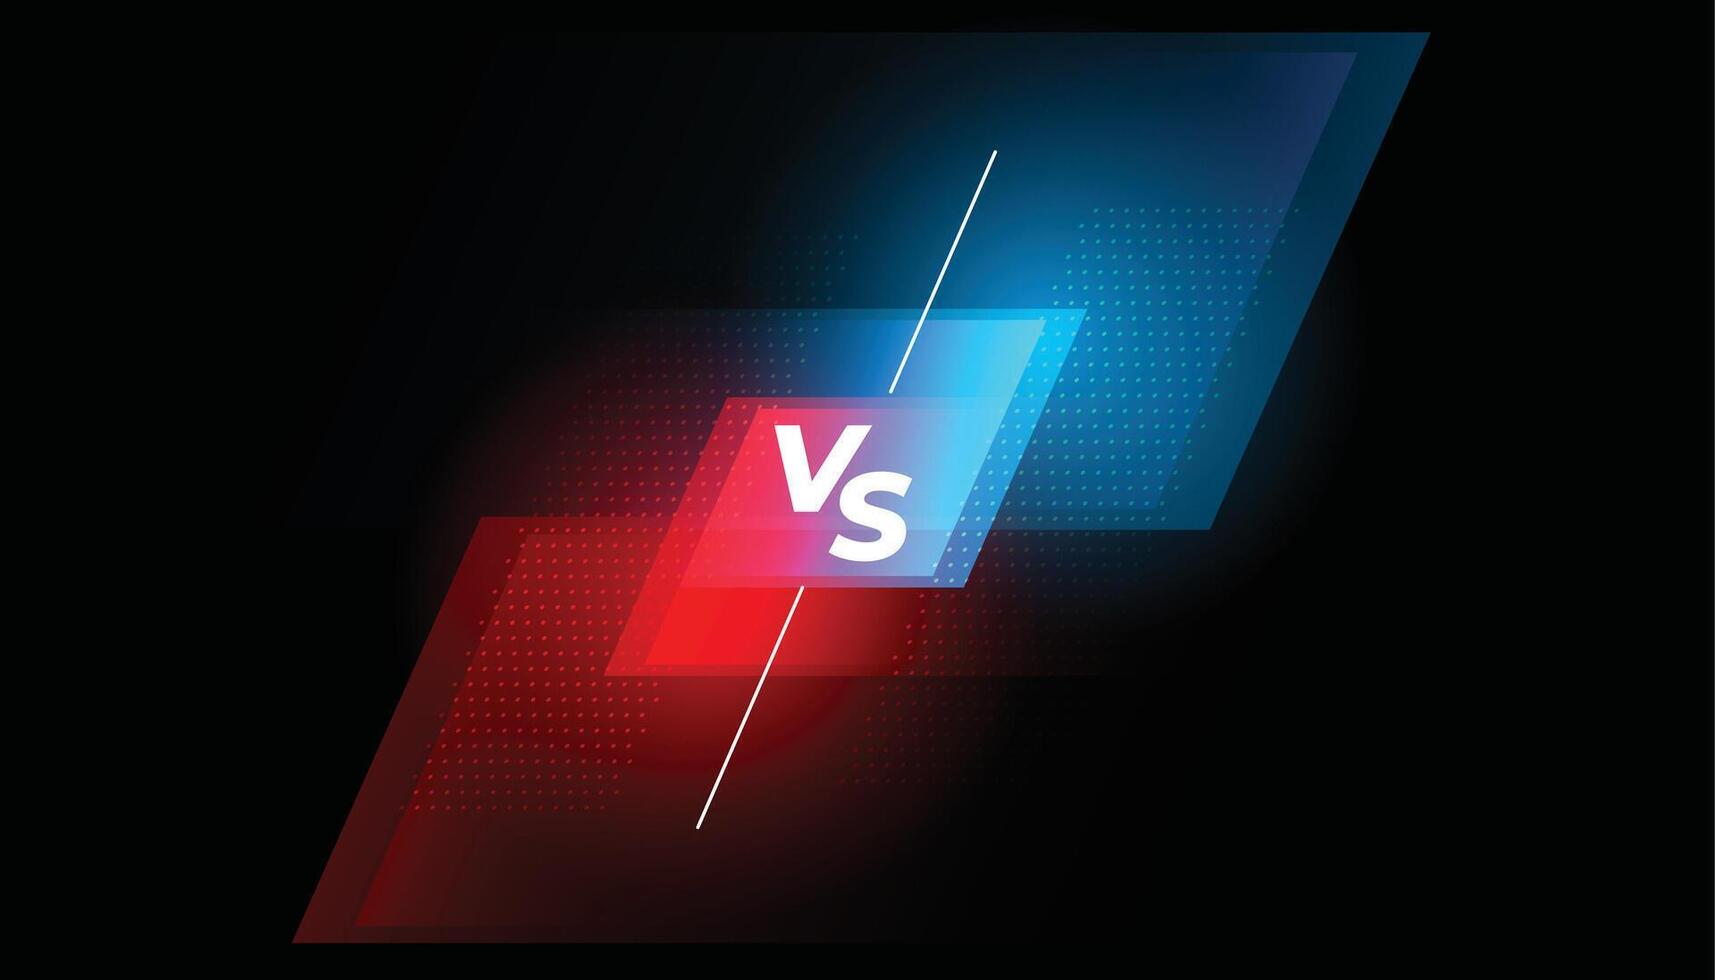 versus vs battle screen red and blue background vector